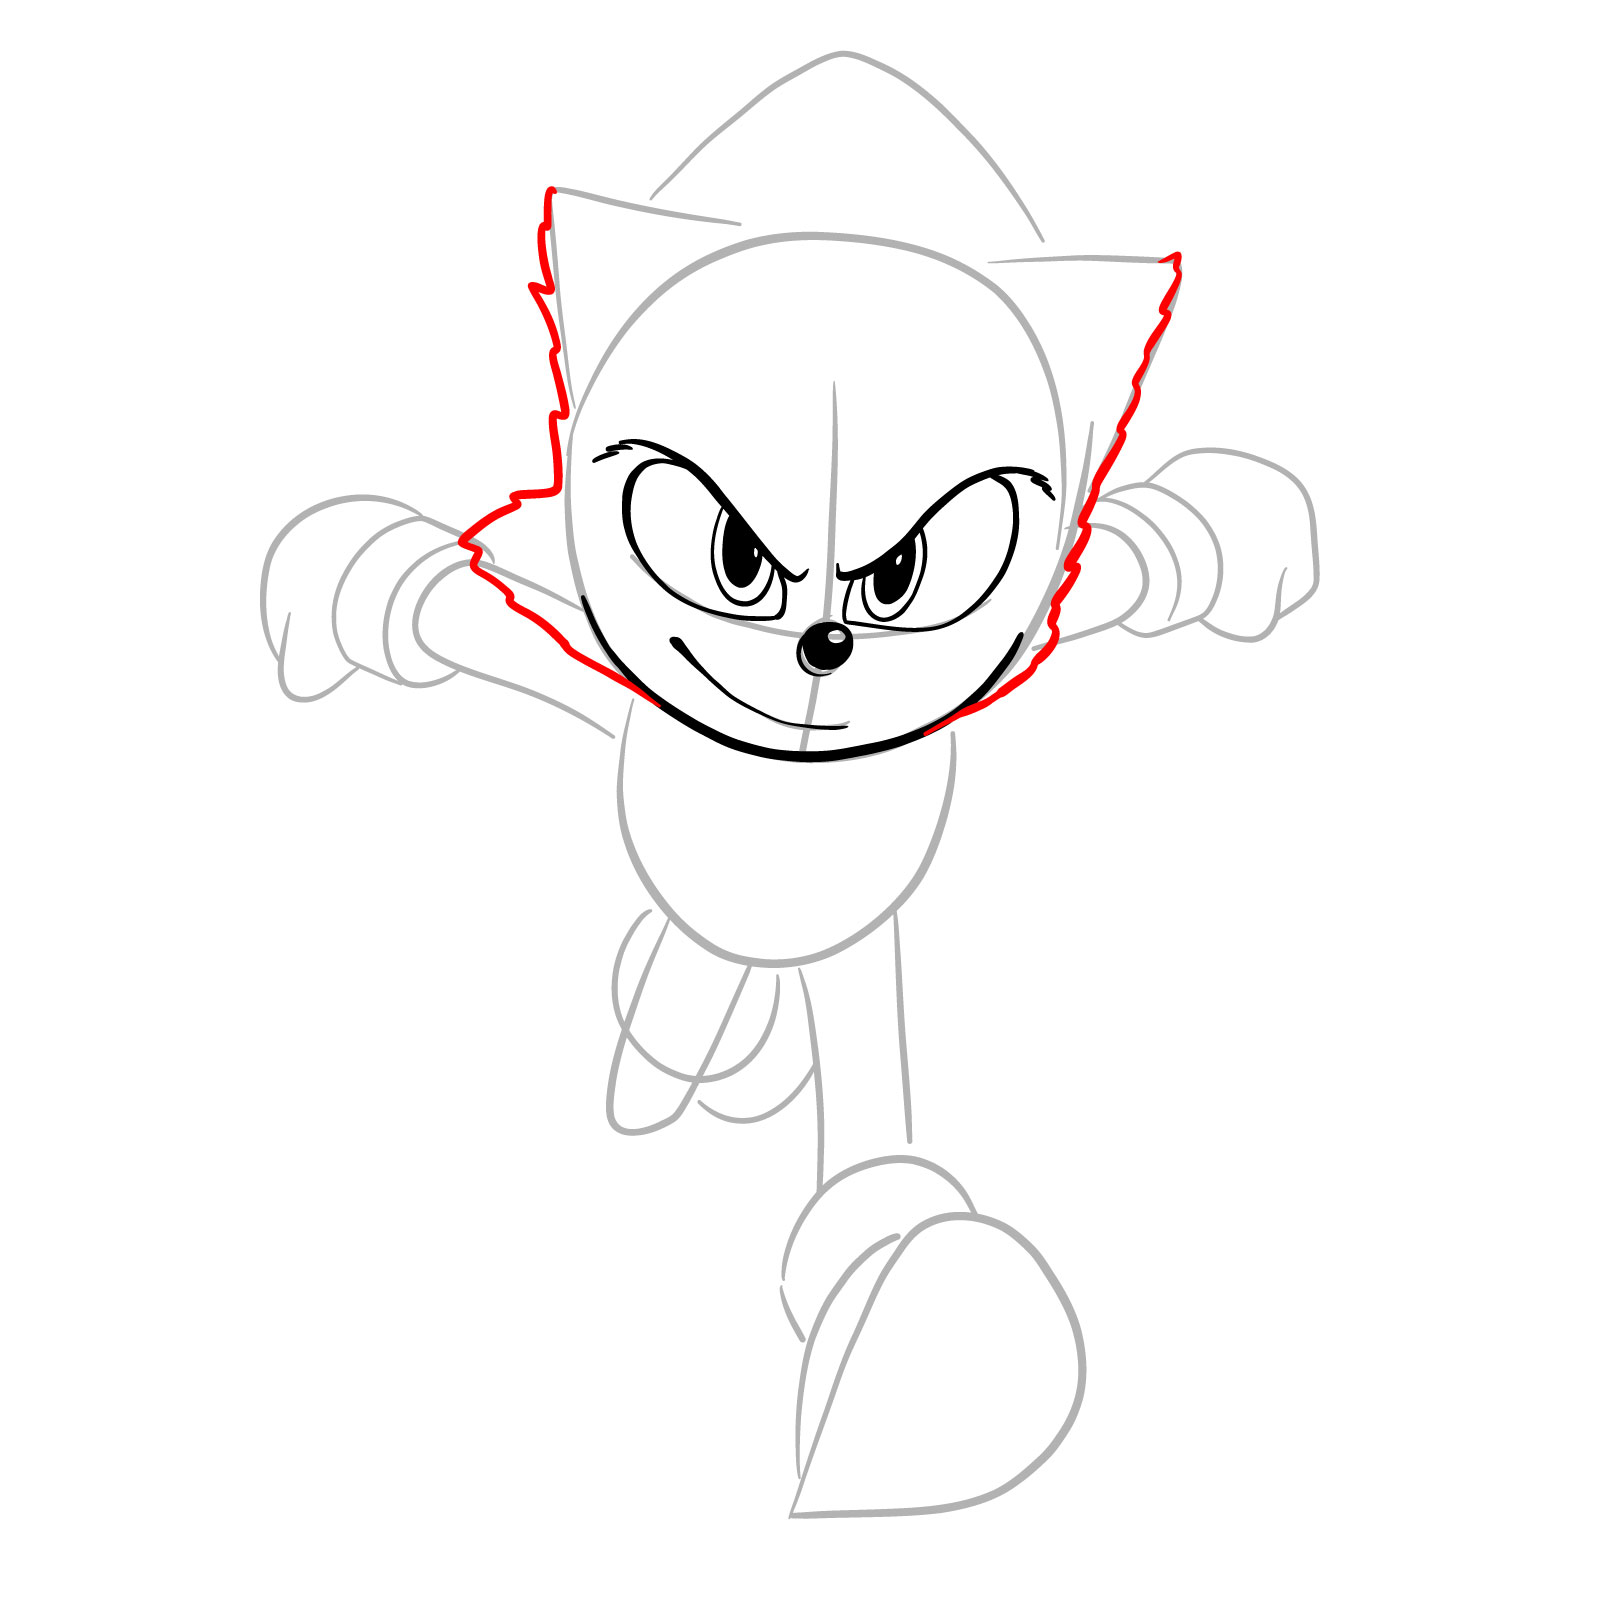 How to draw Sonic from the movie - step 10